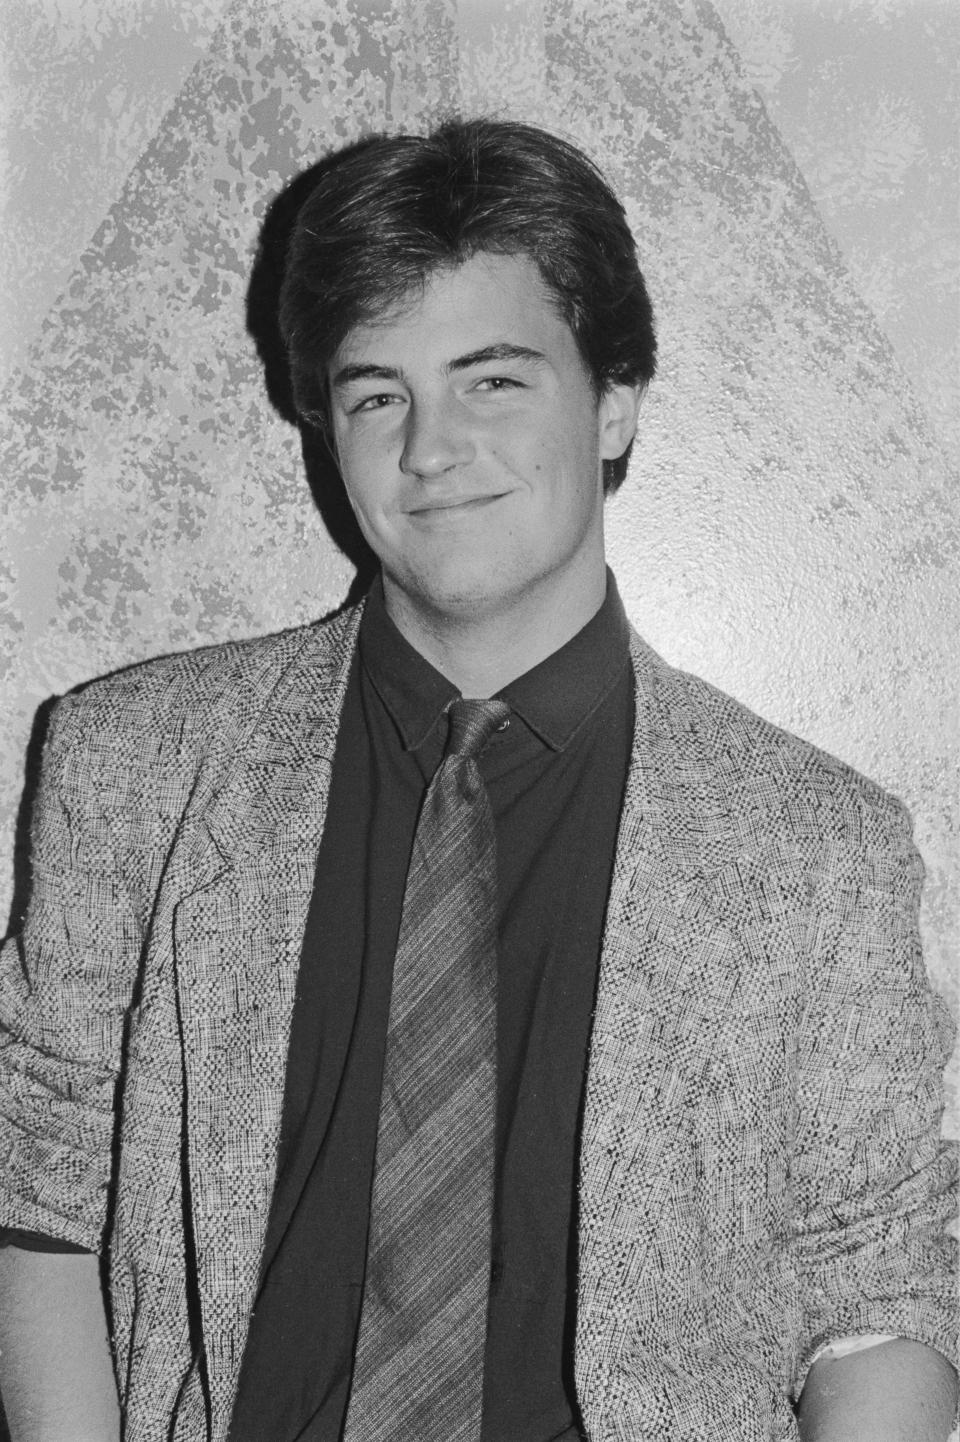 Canadian-American actor Matthew Perry at the Limelight in New York City, circa 1988. / Credit: Getty Images